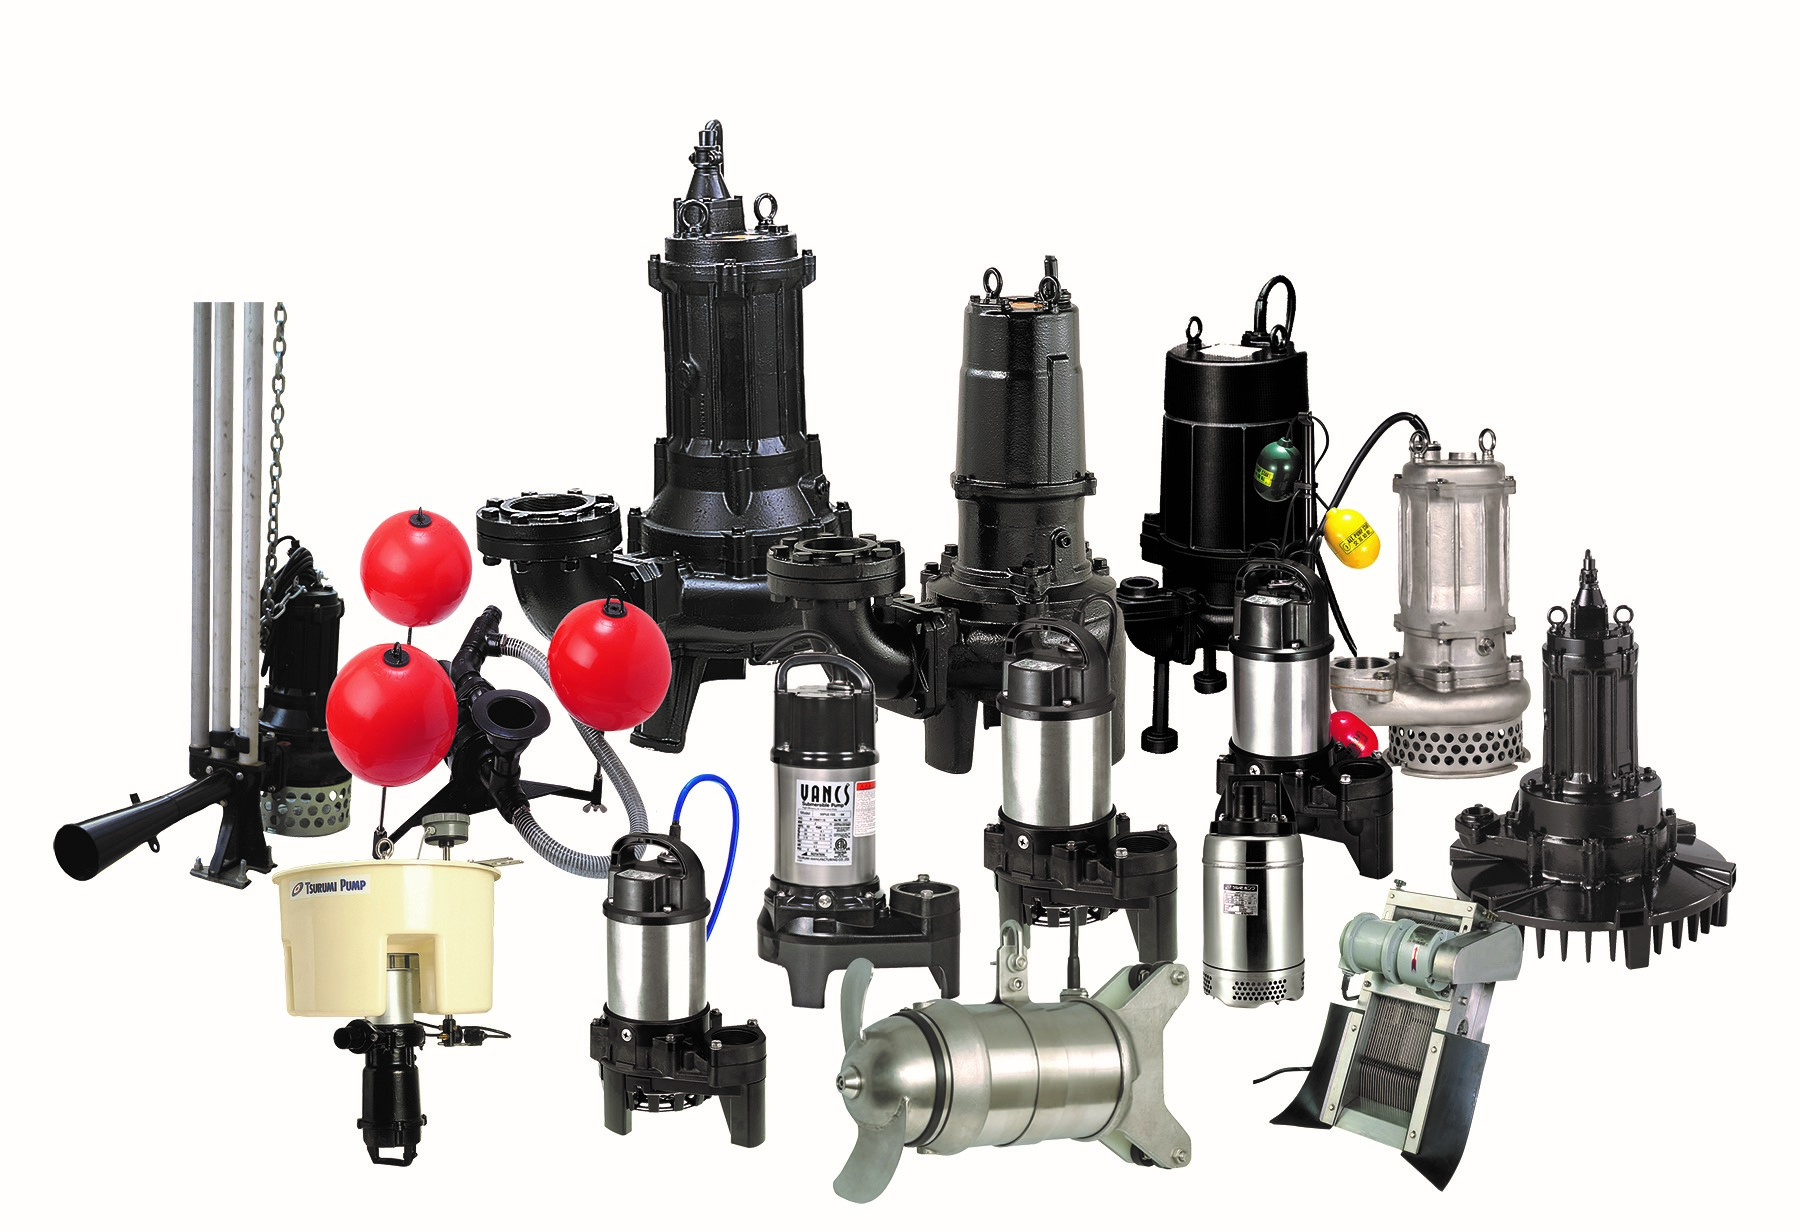 Tsurumi’s range of process equipment and sewage and wastewater pump line, on display this week at WEFTEC.